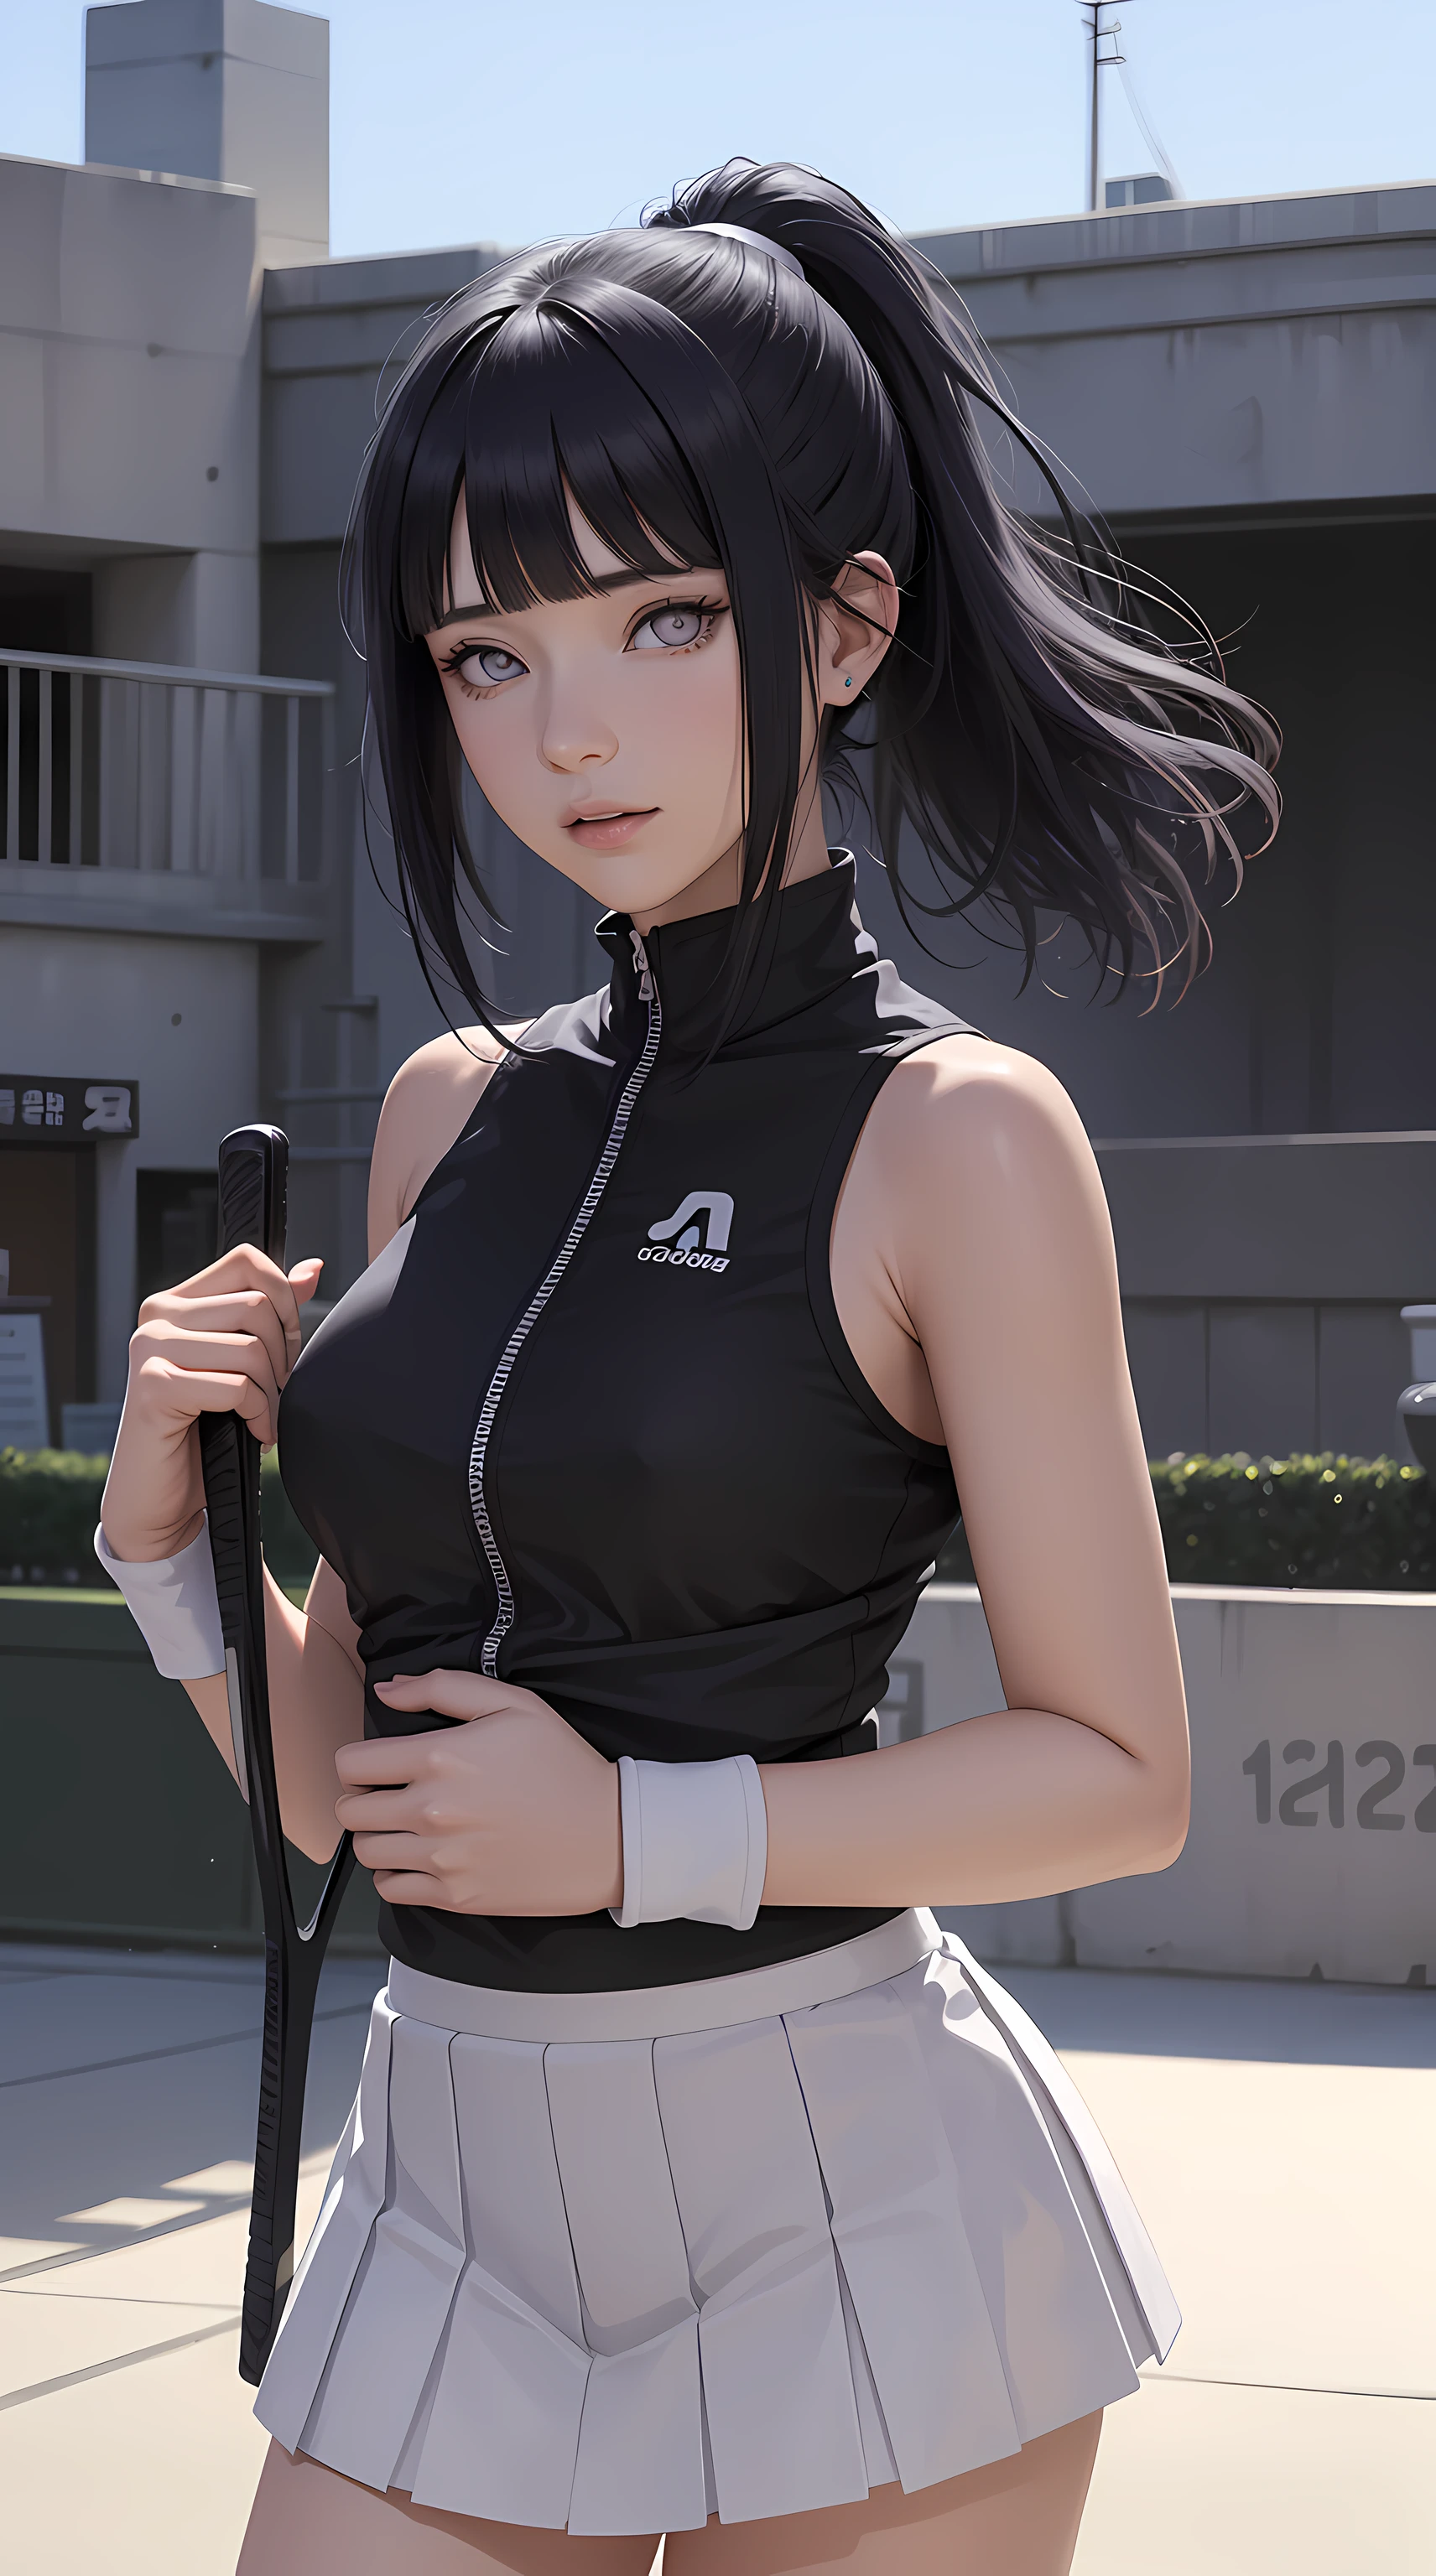 hinata\(boruto\), hinata from the anime naruto, light purple eyes, shoulder length hair, black hair, bangs, ponytail, beautiful, beautiful woman, perfect body, perfect breasts, wearing a tennis outfit, wearing a tennis hat, being on the tennis court, holding a tennis racket, looking at the audience, a slight smile, realism, masterpiece, textured leather, super detailed, high detail, high quality, best quality, 1080p, 16k